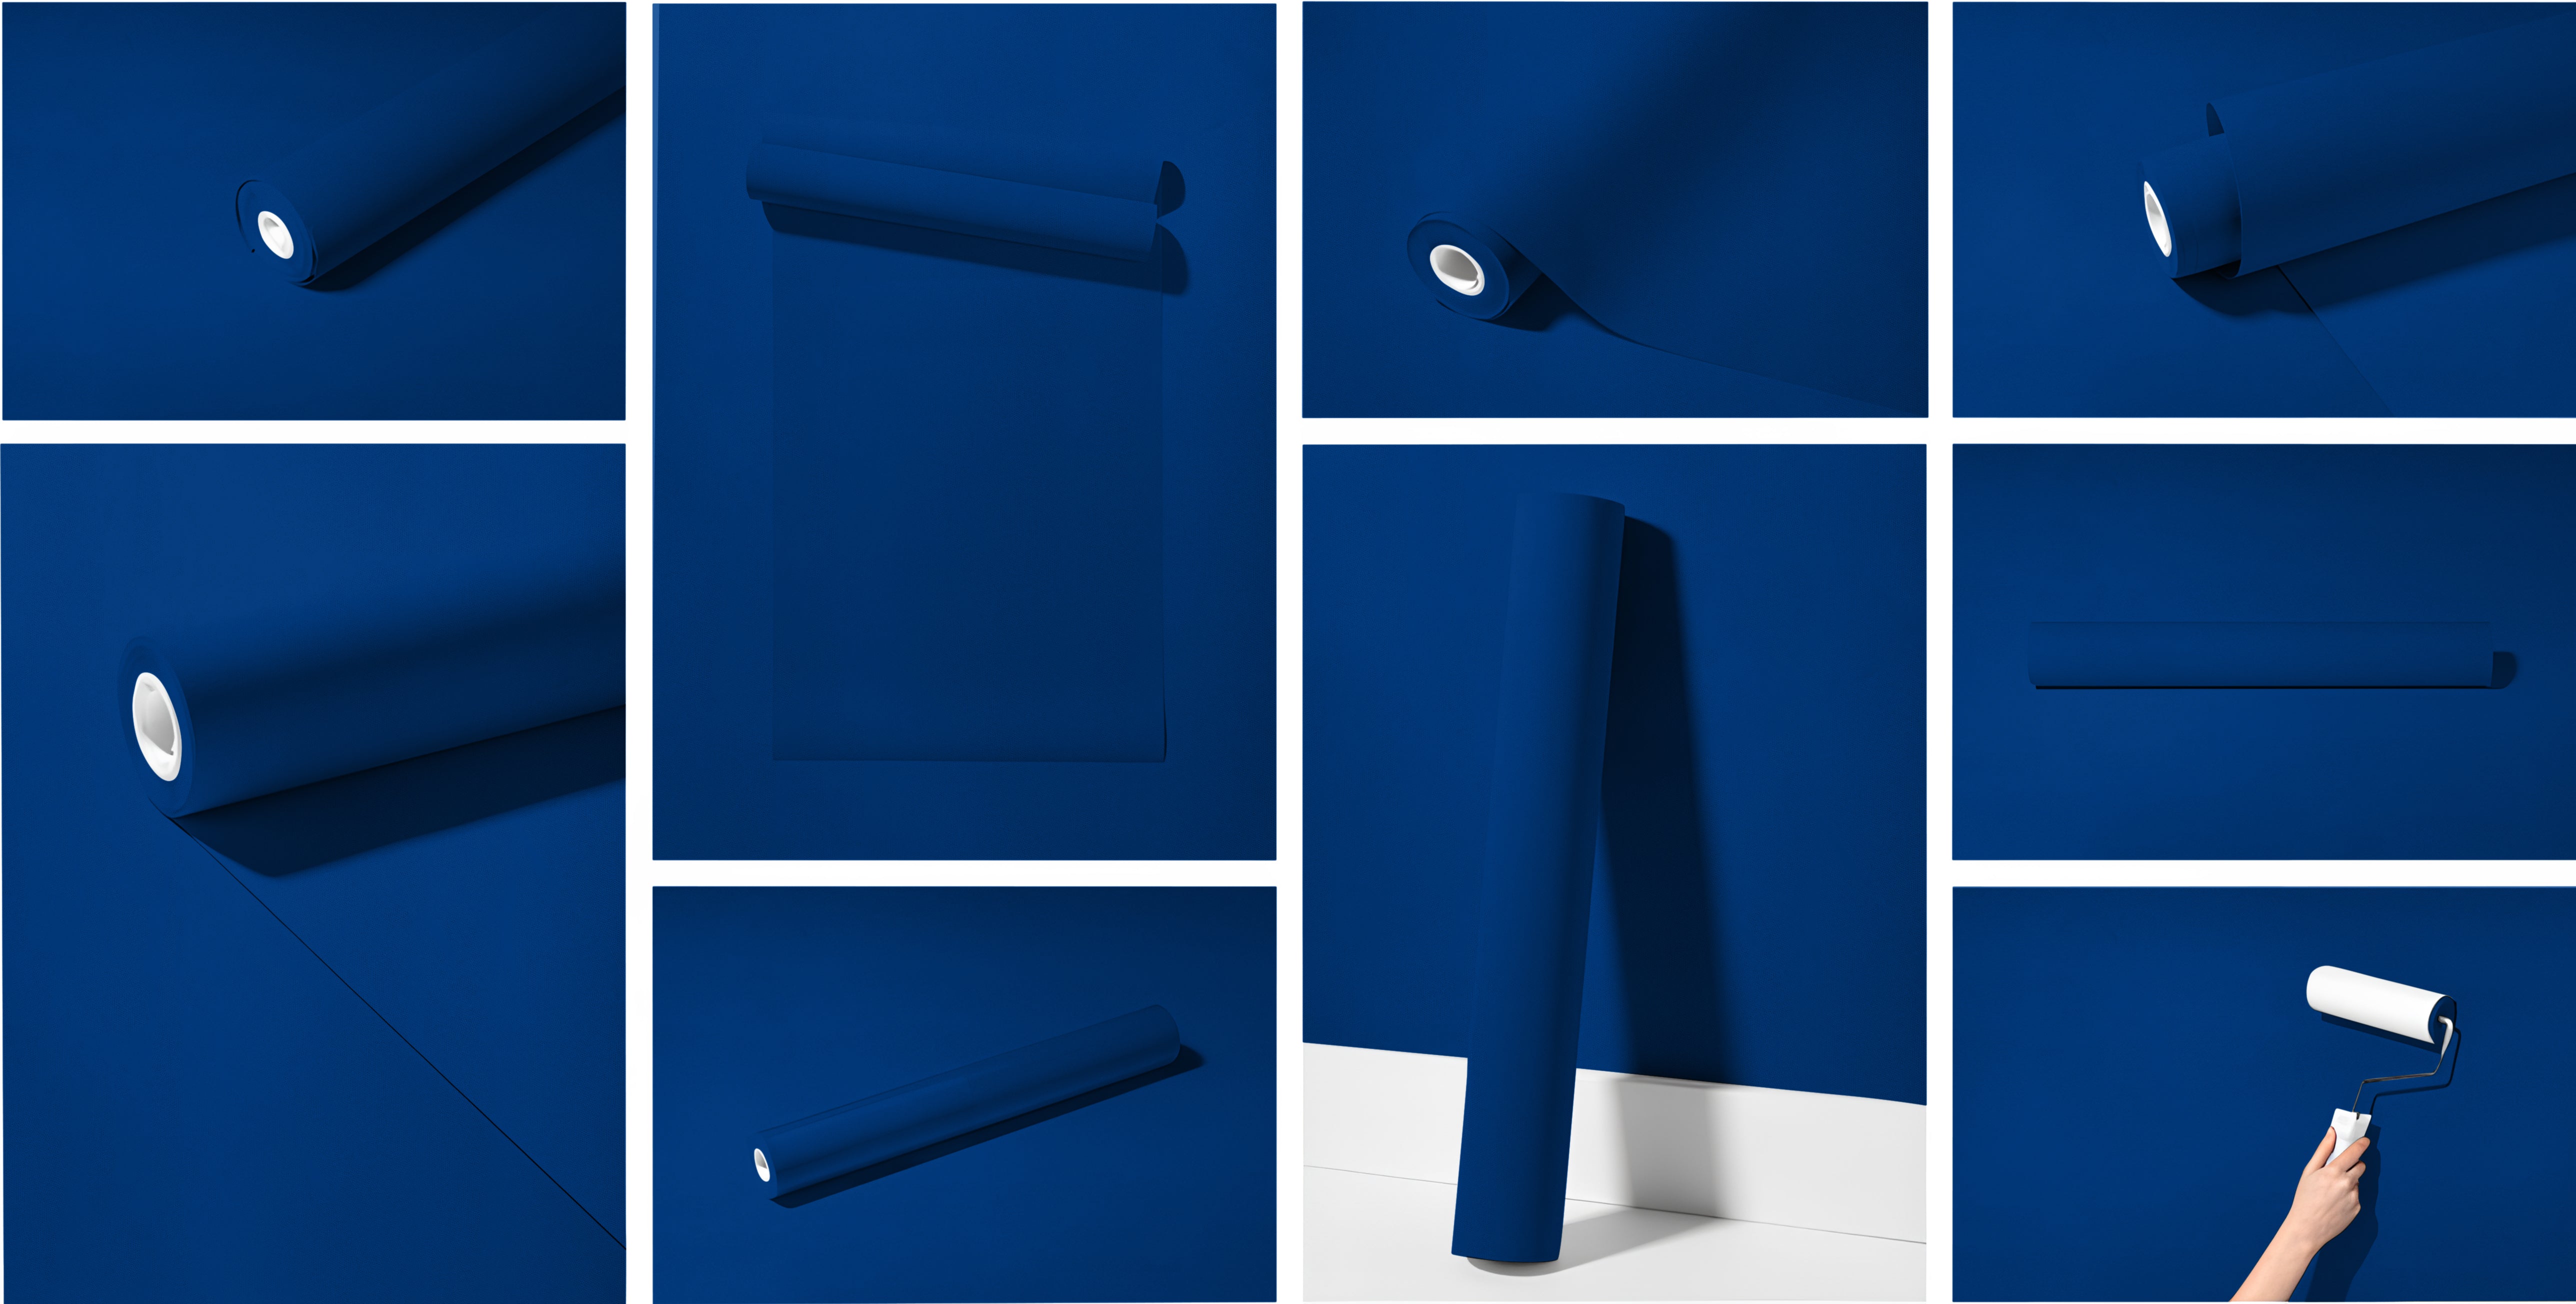 Peel & Stick Removable Re-usable Paint - Color RAL 5002 Ultramarine Blue - offRAL™ - RALRAW LLC, USA